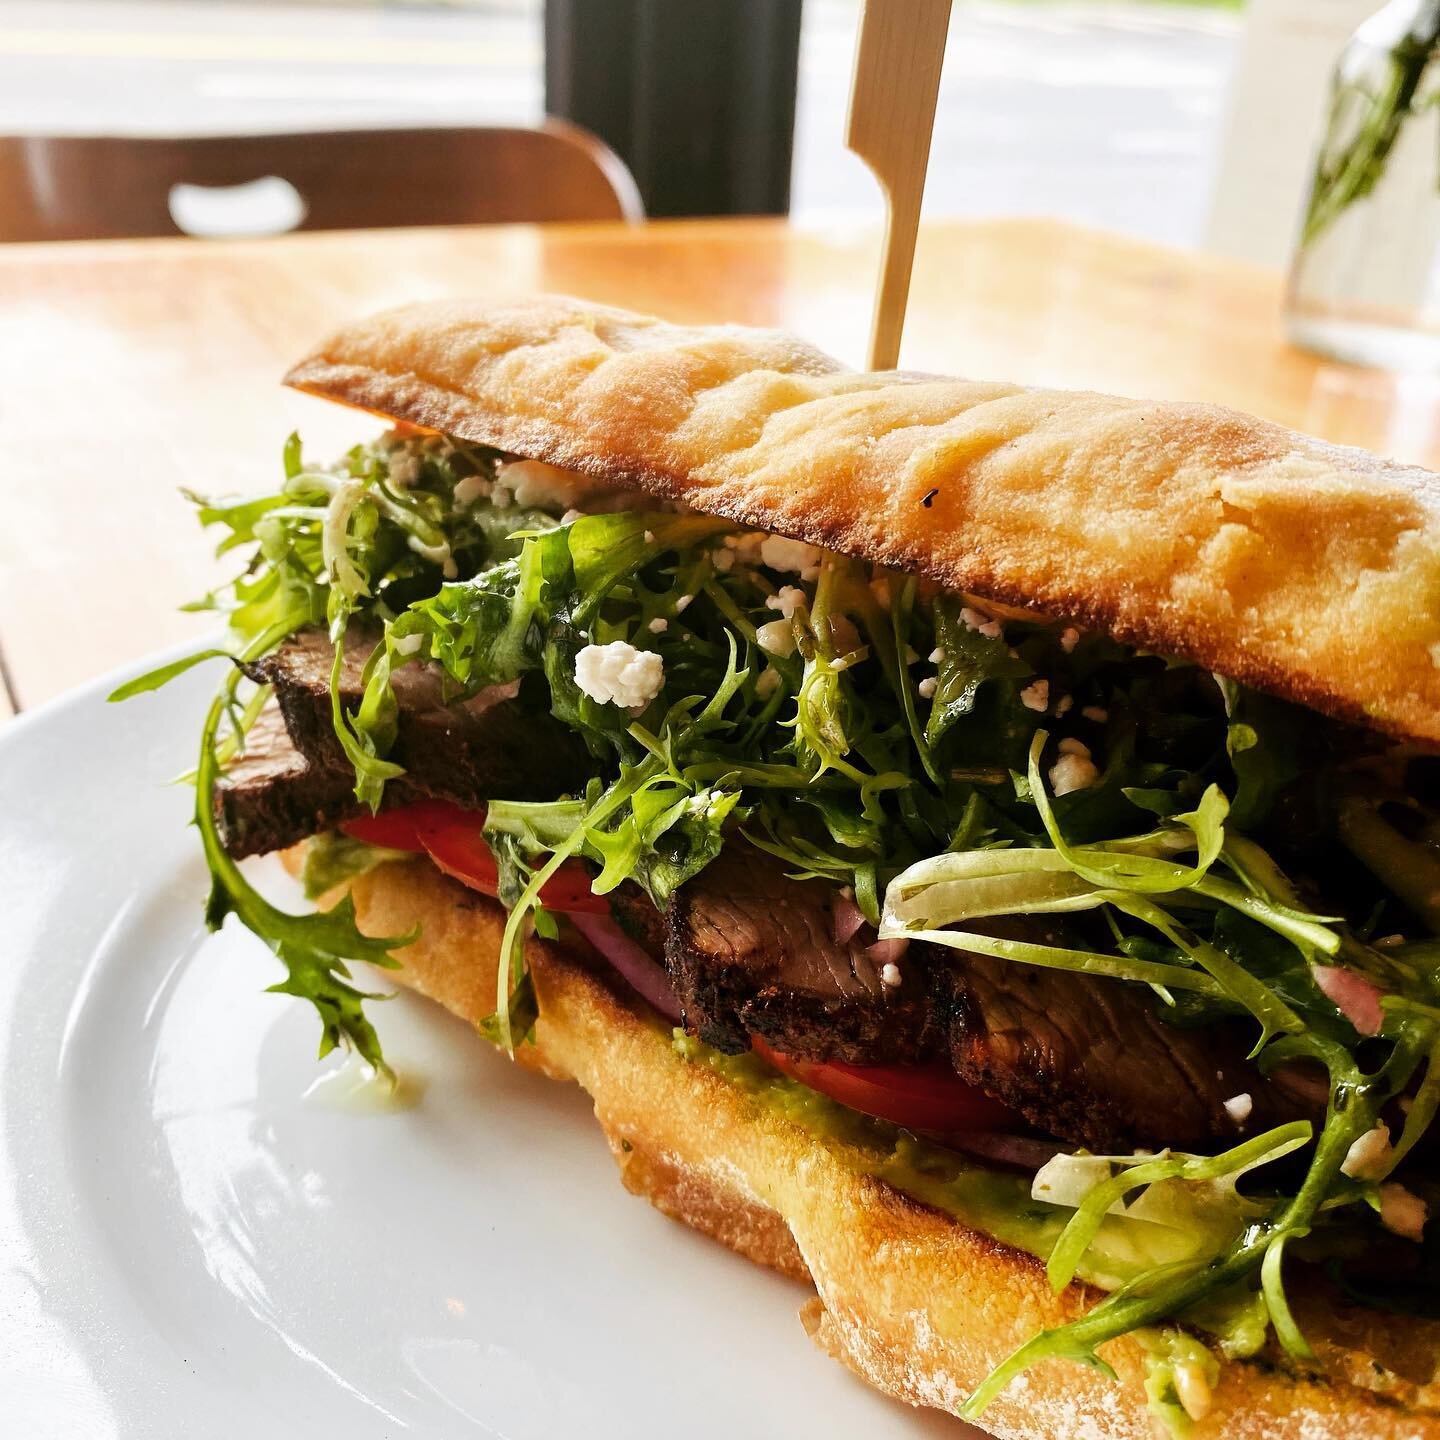 Today&rsquo;s special: Grilled tri tip on ciabatta with guacamole, red onion, tomato, fris&eacute;e, goat cheese and chimichurri.